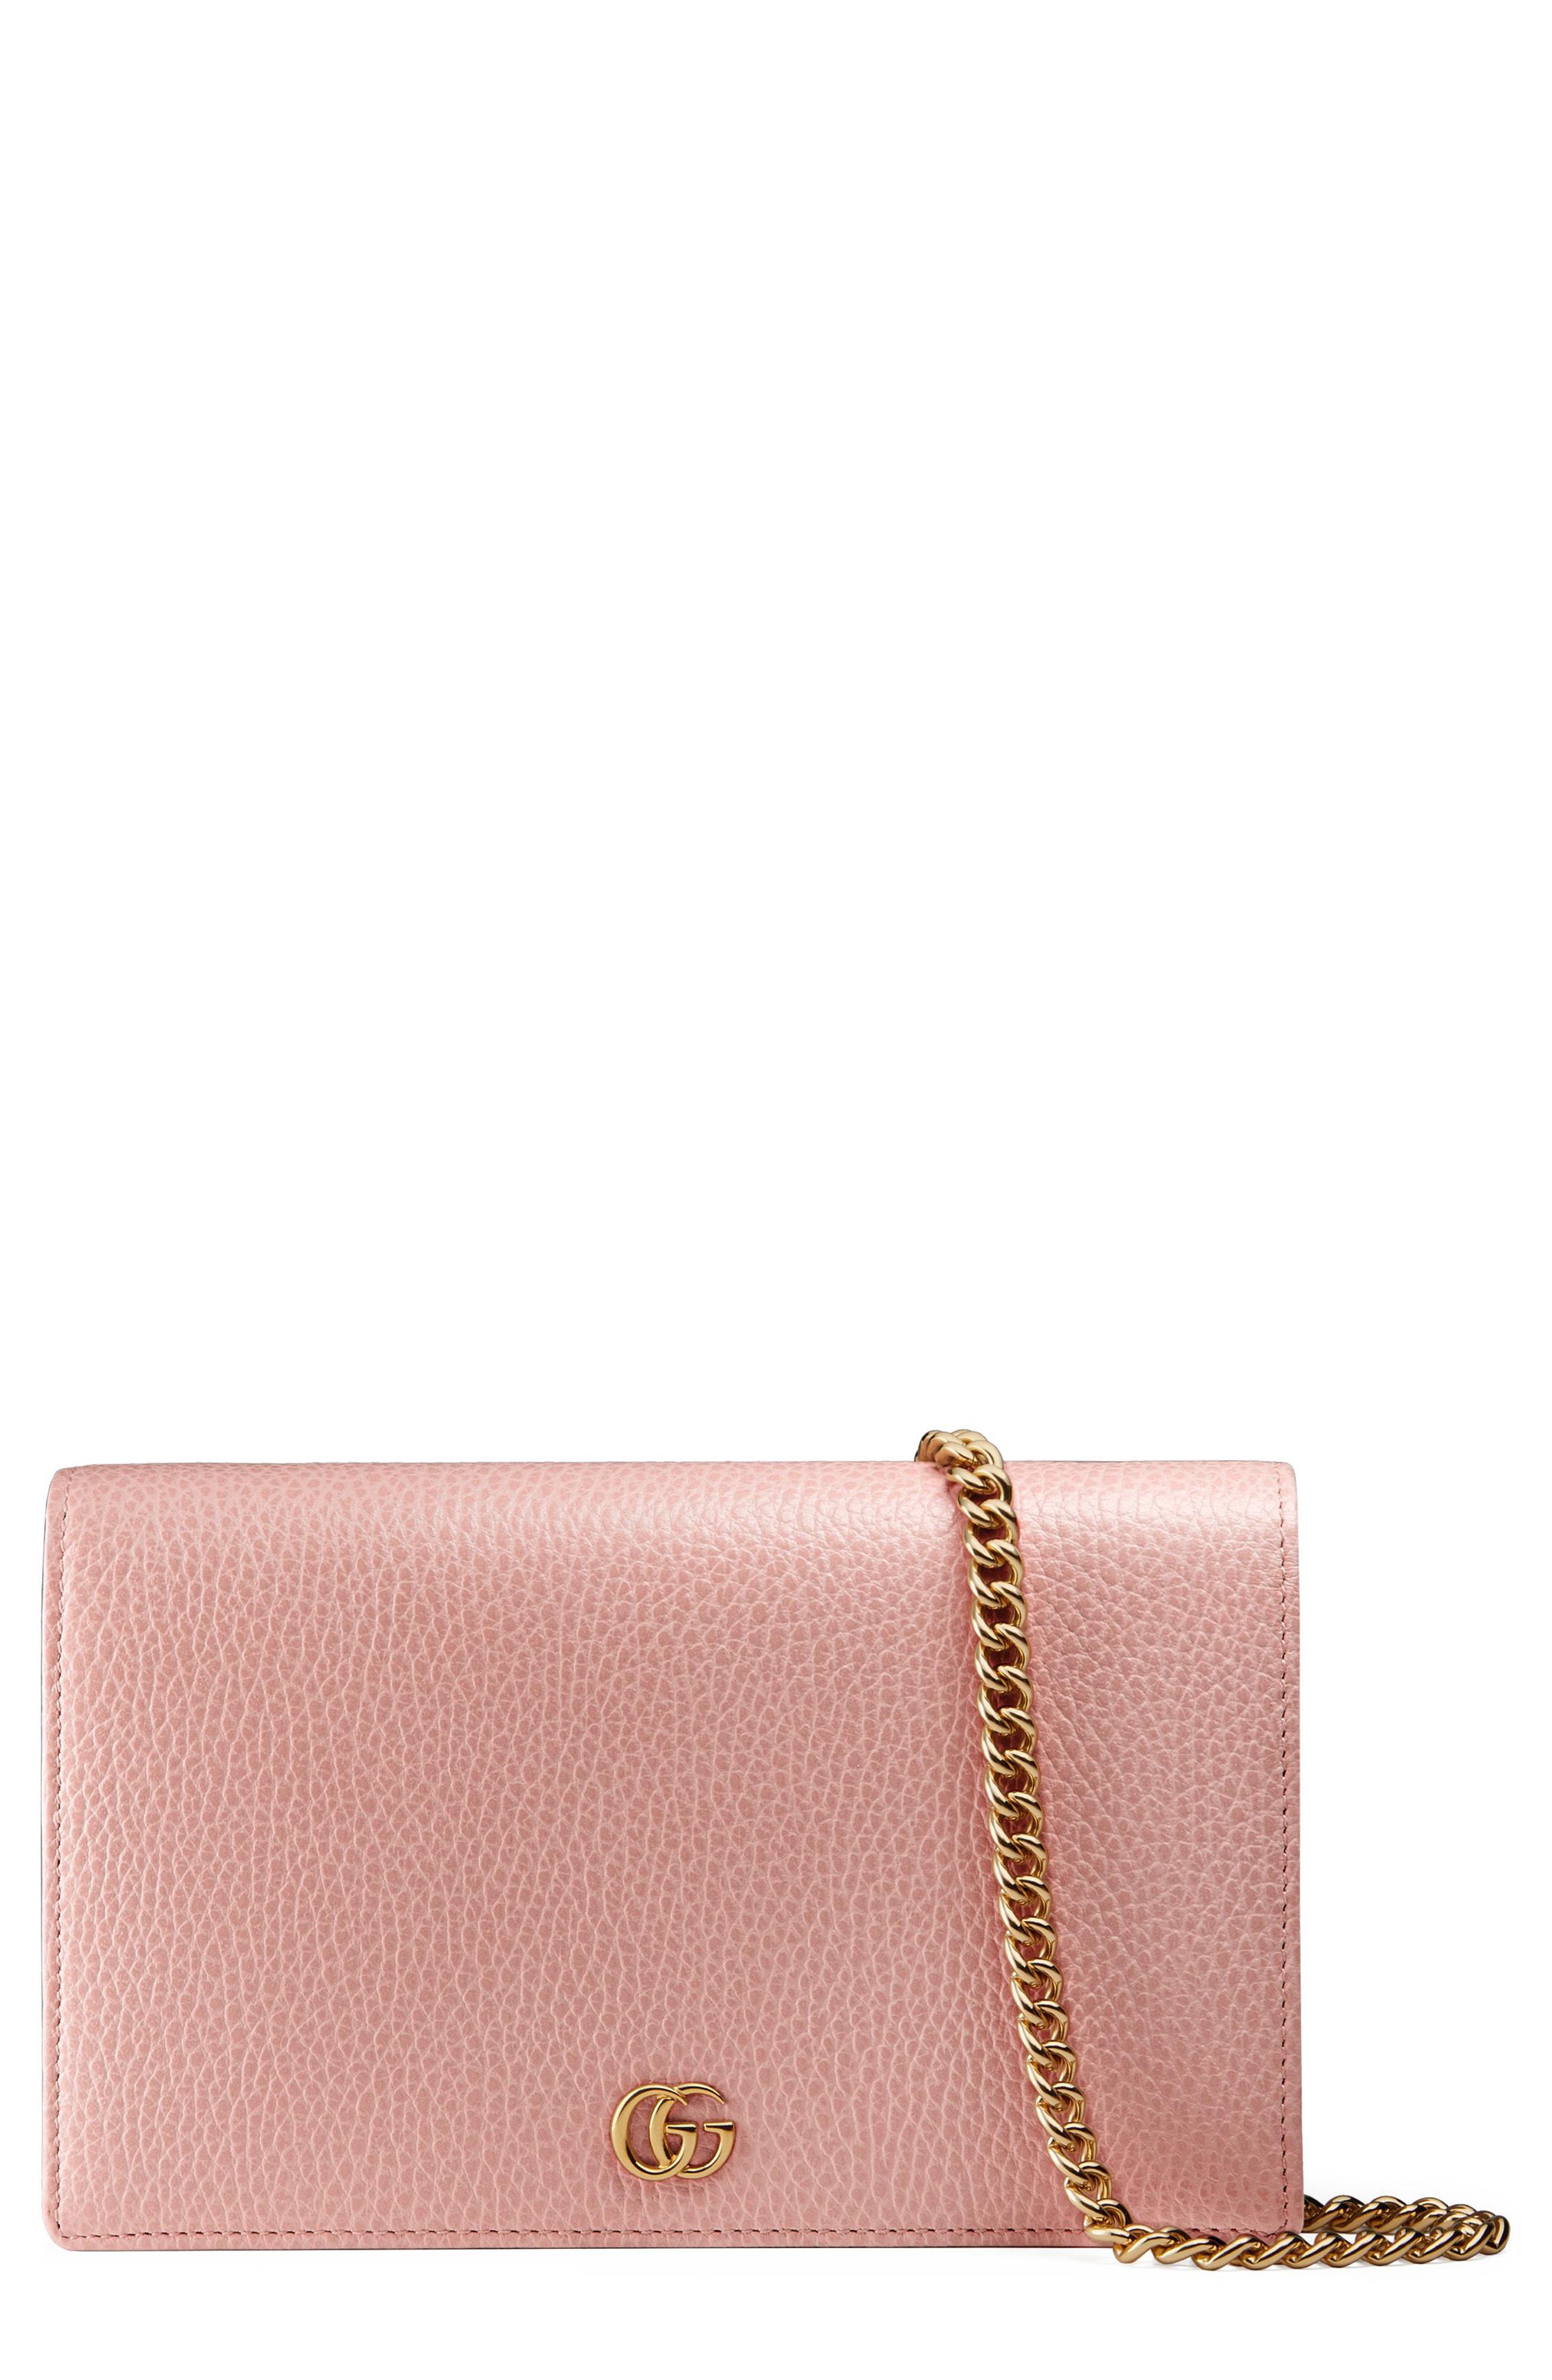 Gucci Marmont Leather Wallet On A Chain in Pink - Lyst